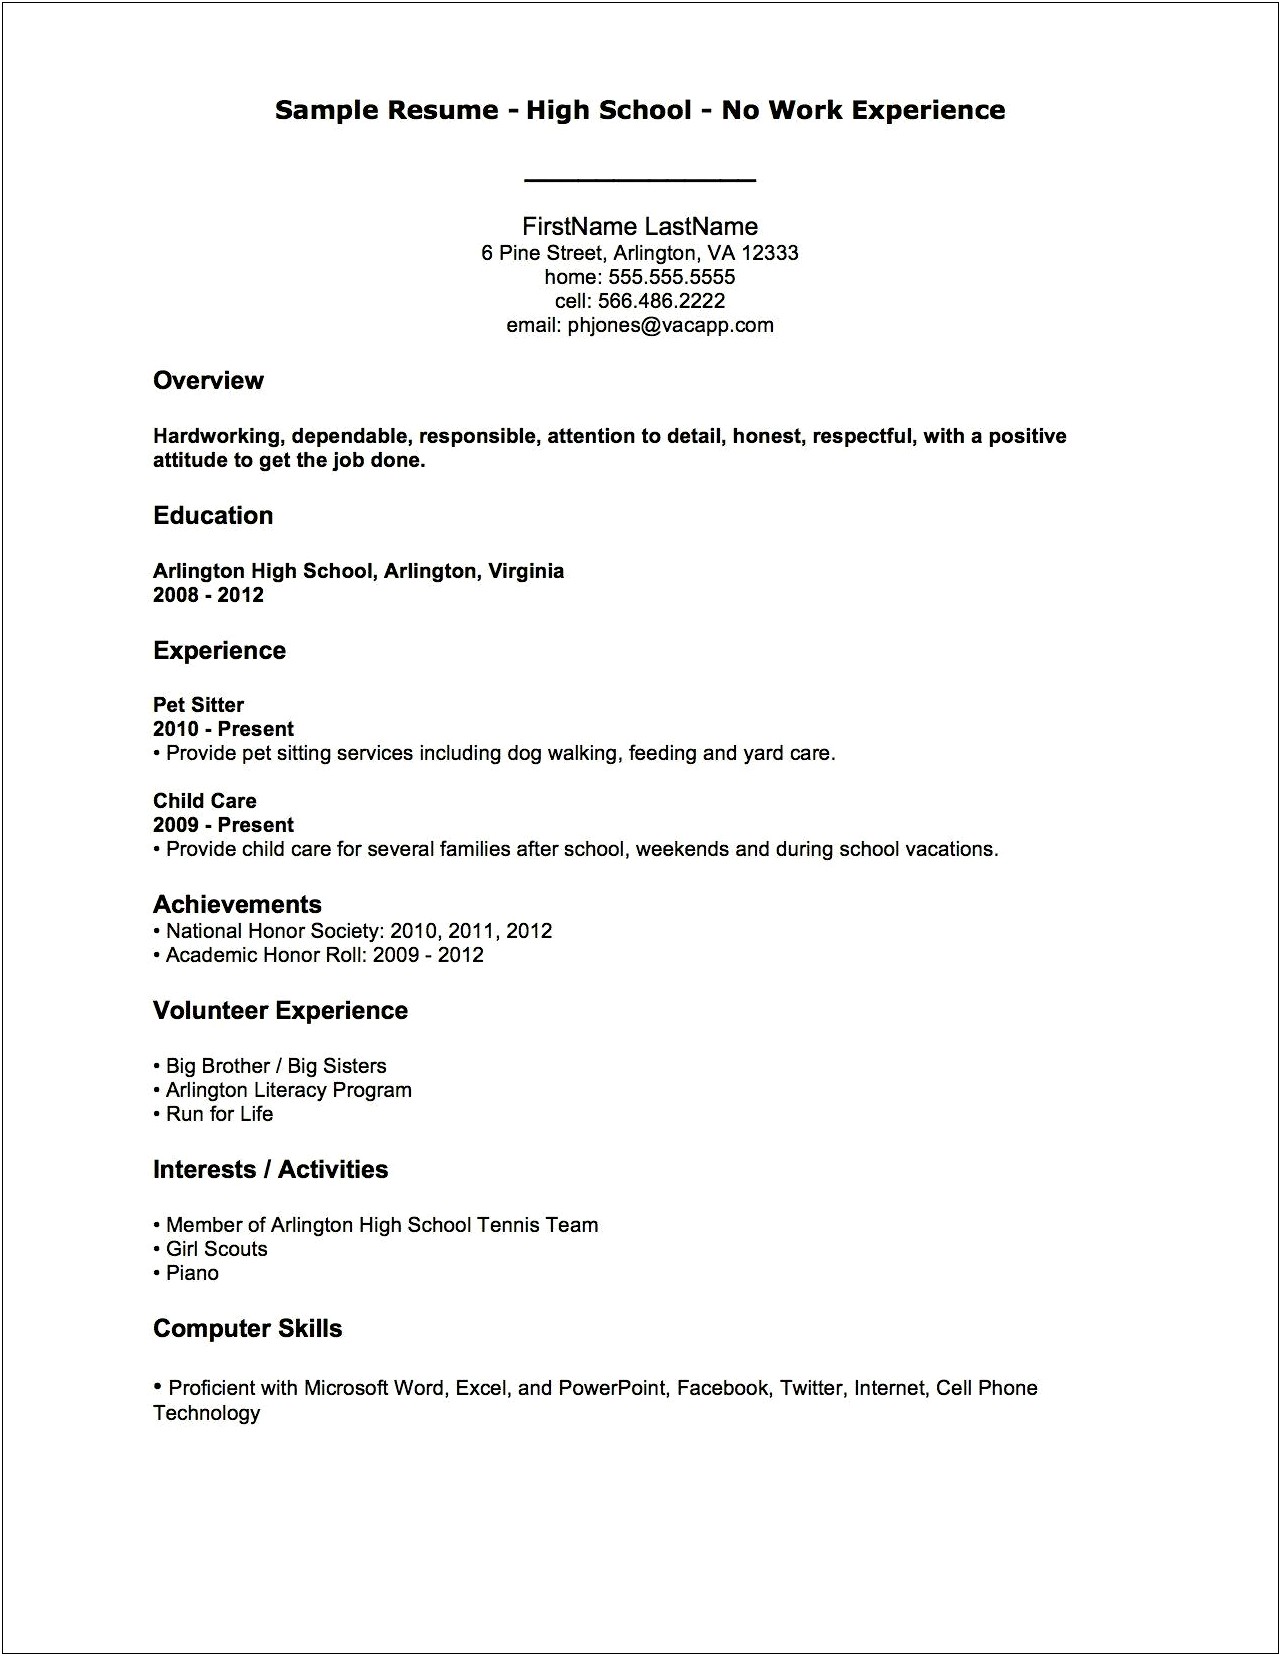 Copy Paste Resume For No Job Experience